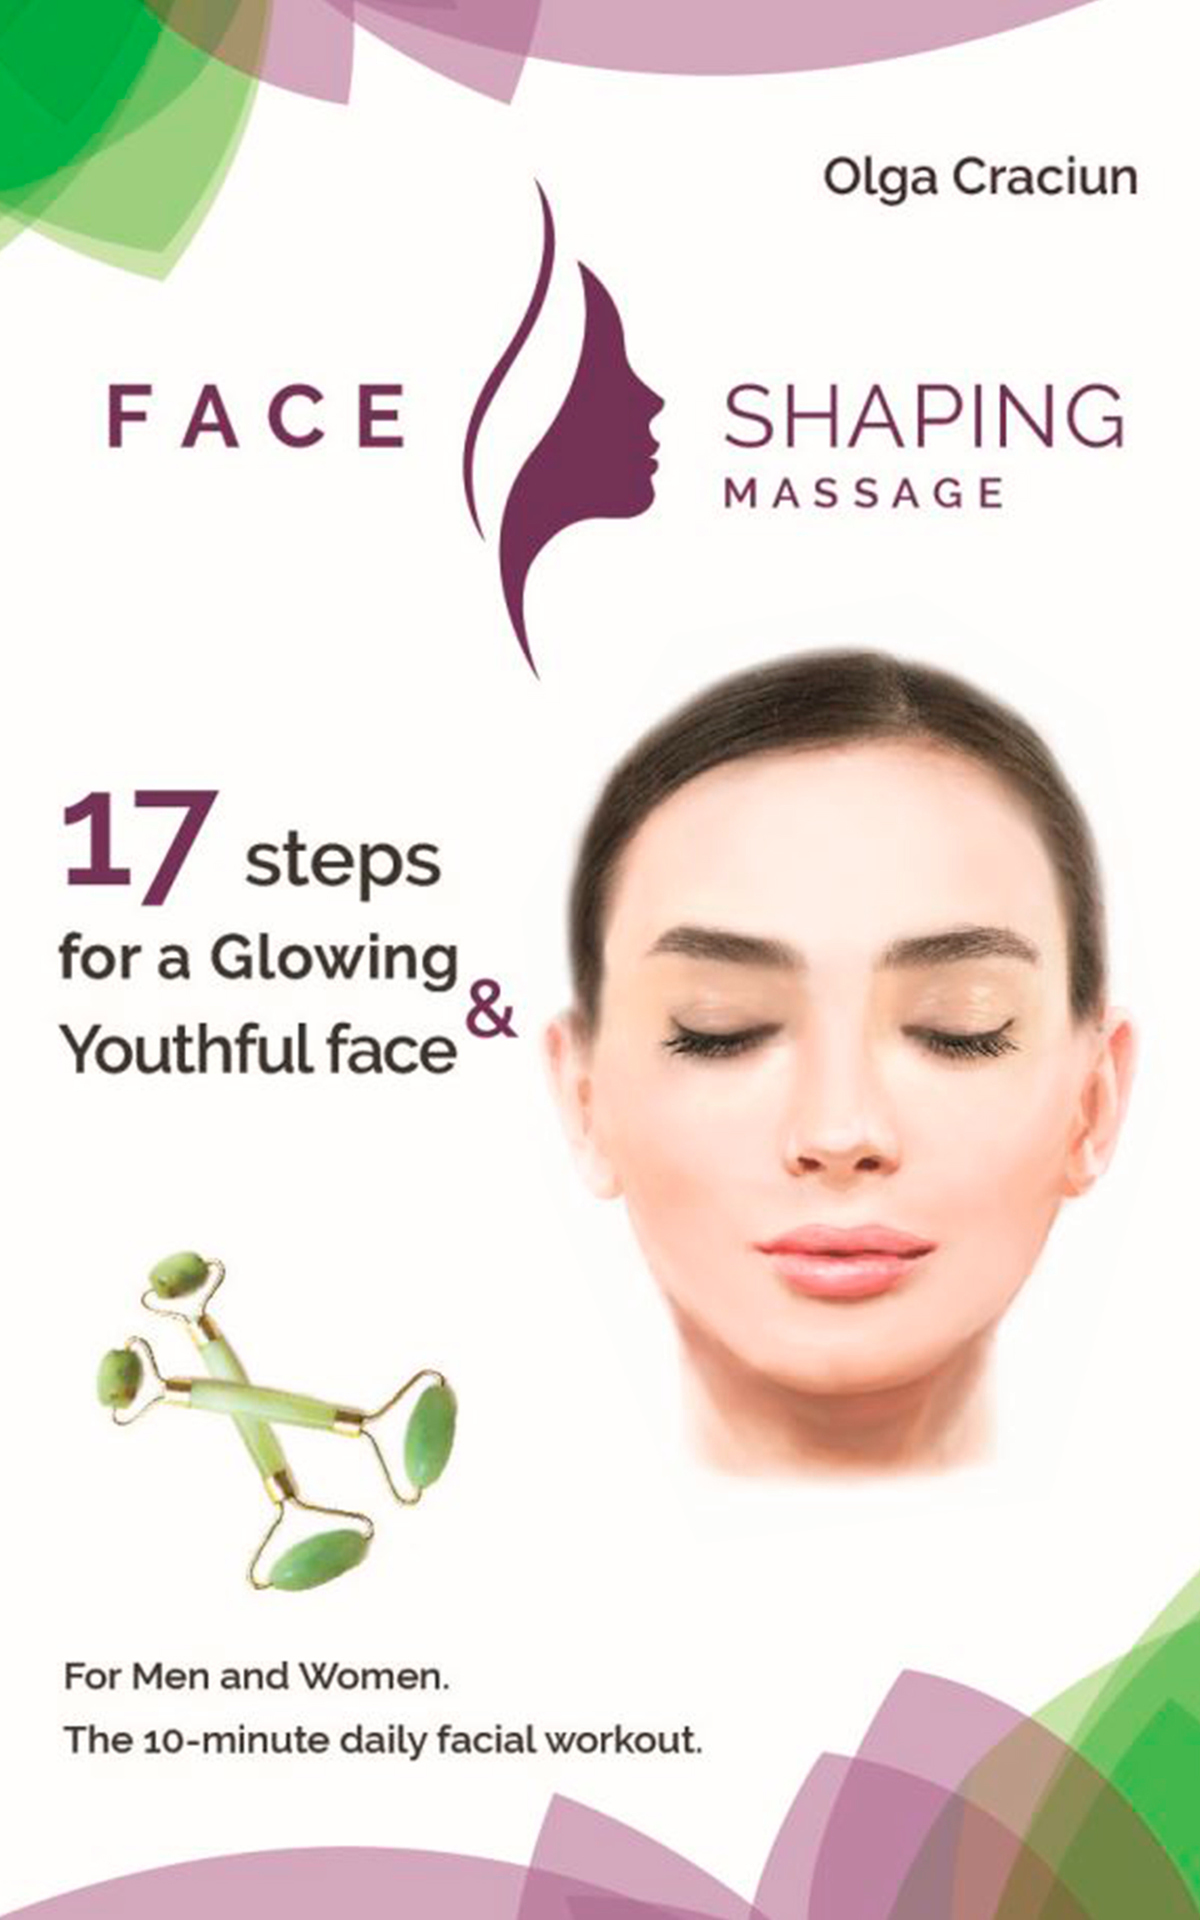 FACE SHAPING MASSAGE 17 Steps for a Glowing Youthful Face For Men and Women - photo 1